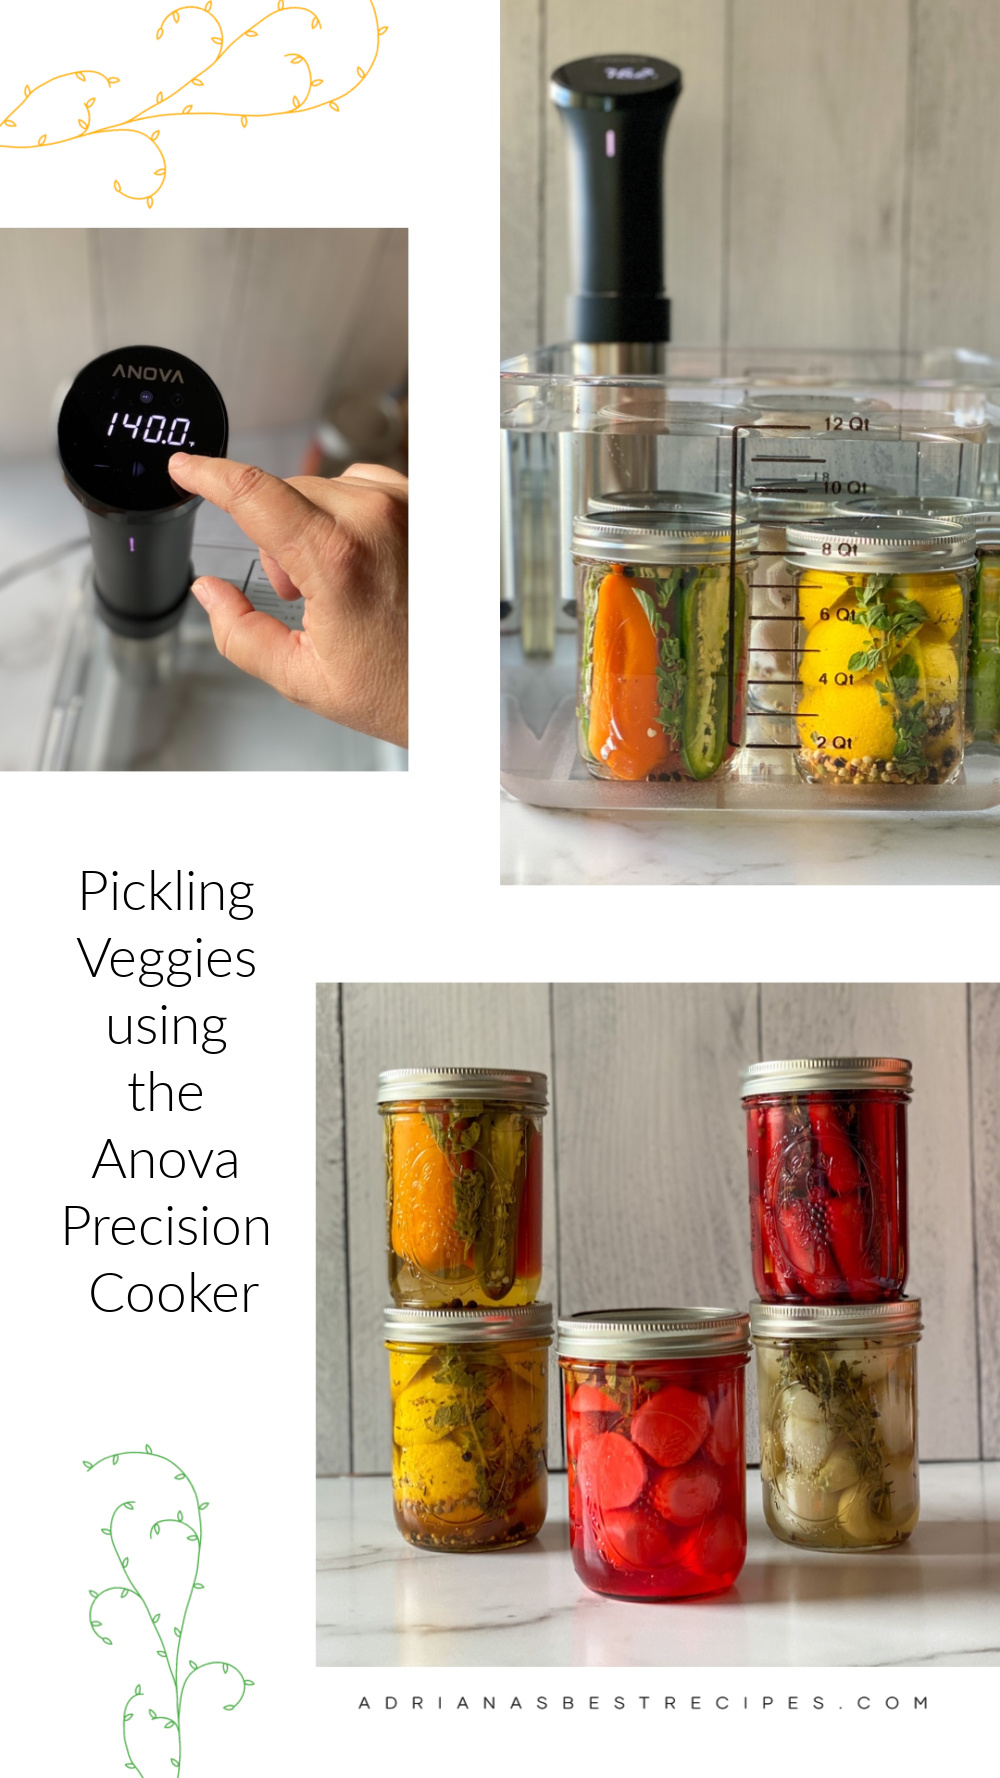 a collage of images showing how to use the Anova Precision Cooker